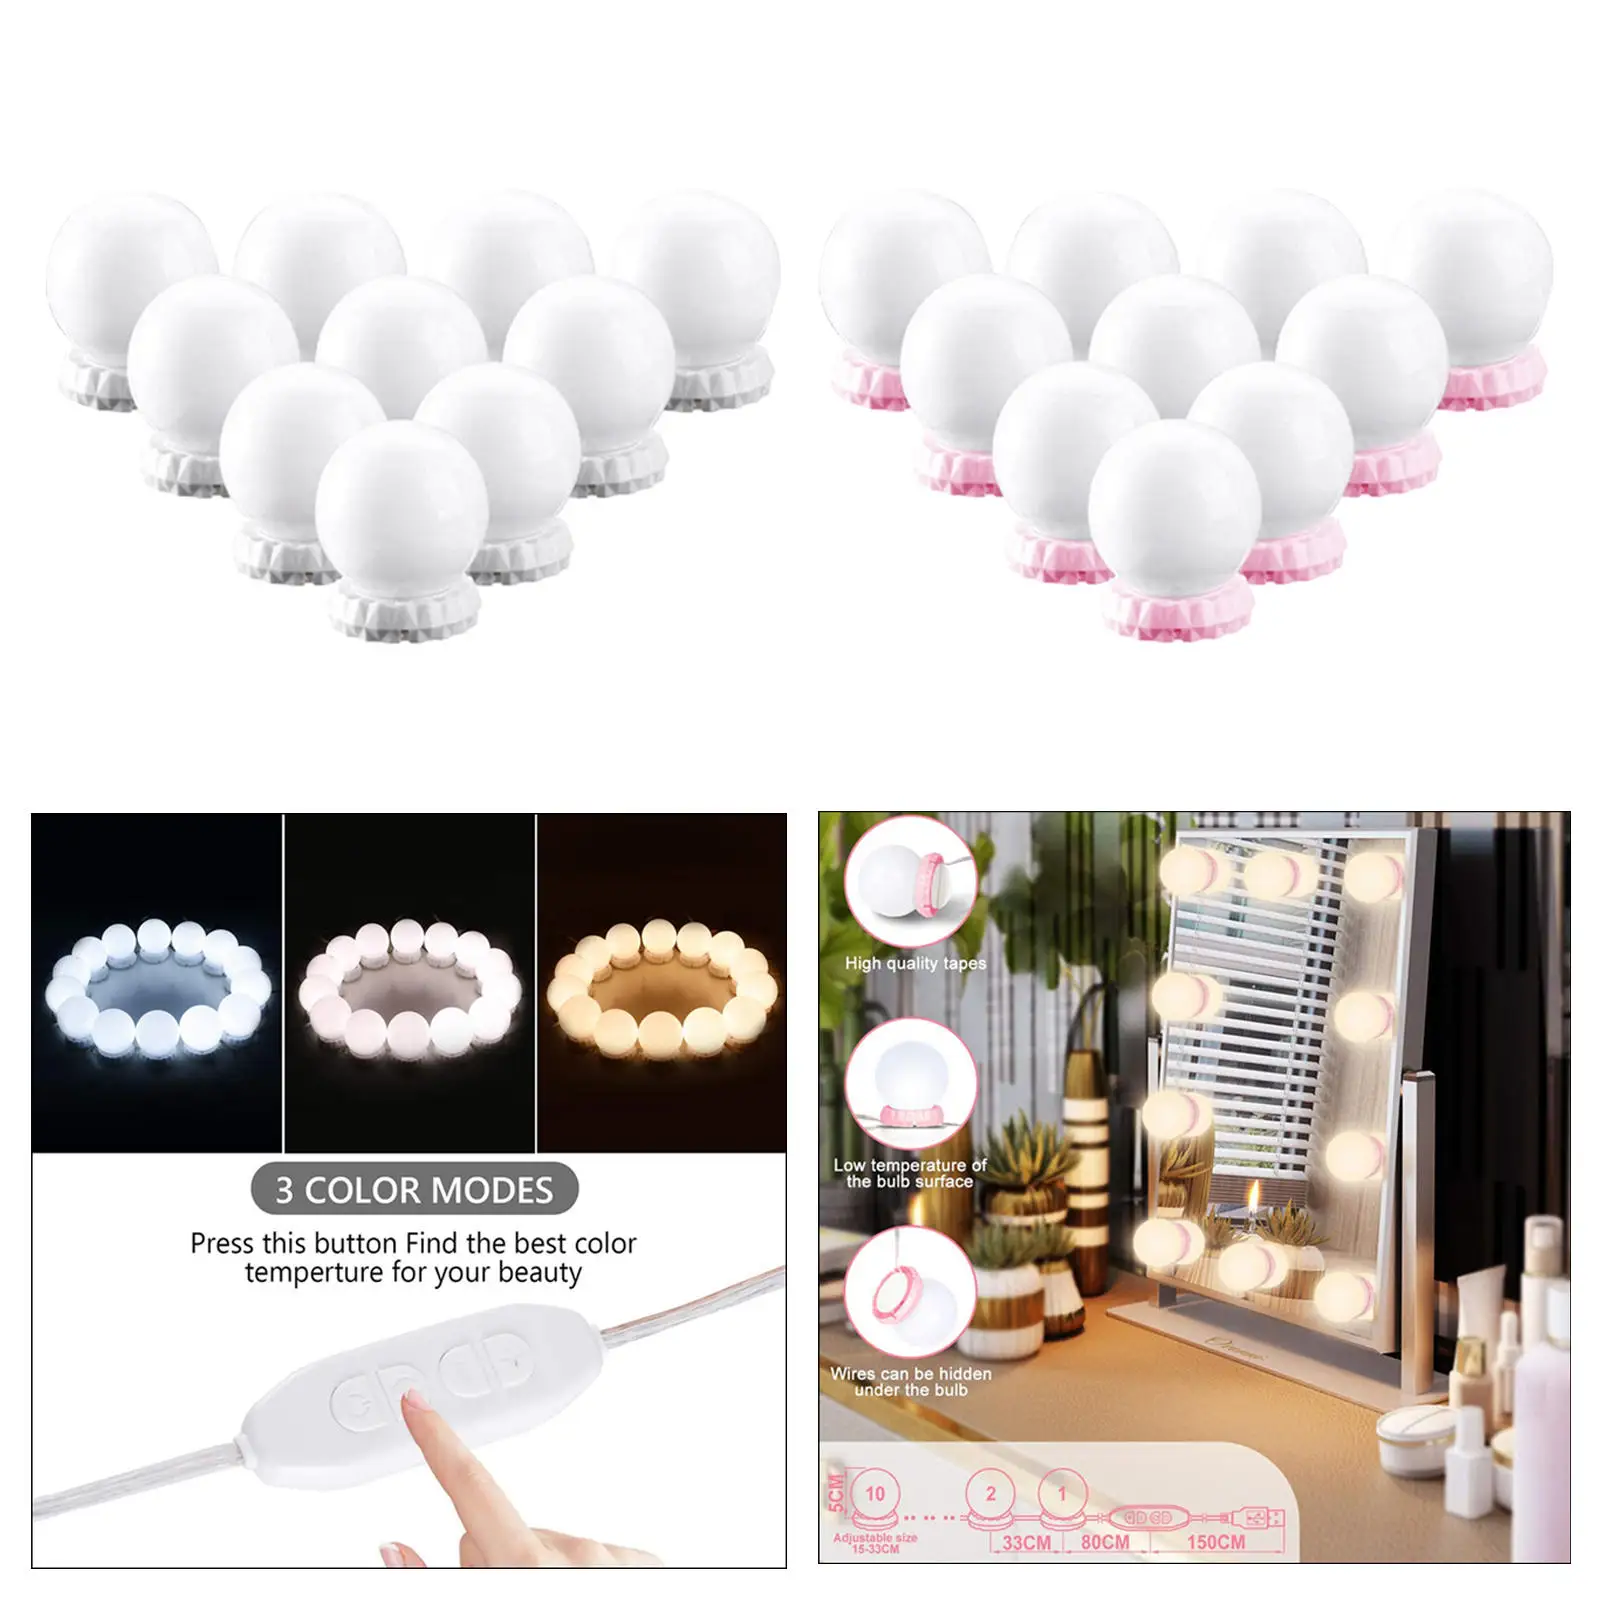 Vanity Mirror Lights Kit with 3 Light Colors with 10 Dimmable Bulbs Vanity Makeup Lamp for Makeup Vanity Table Bathroom Bedroom